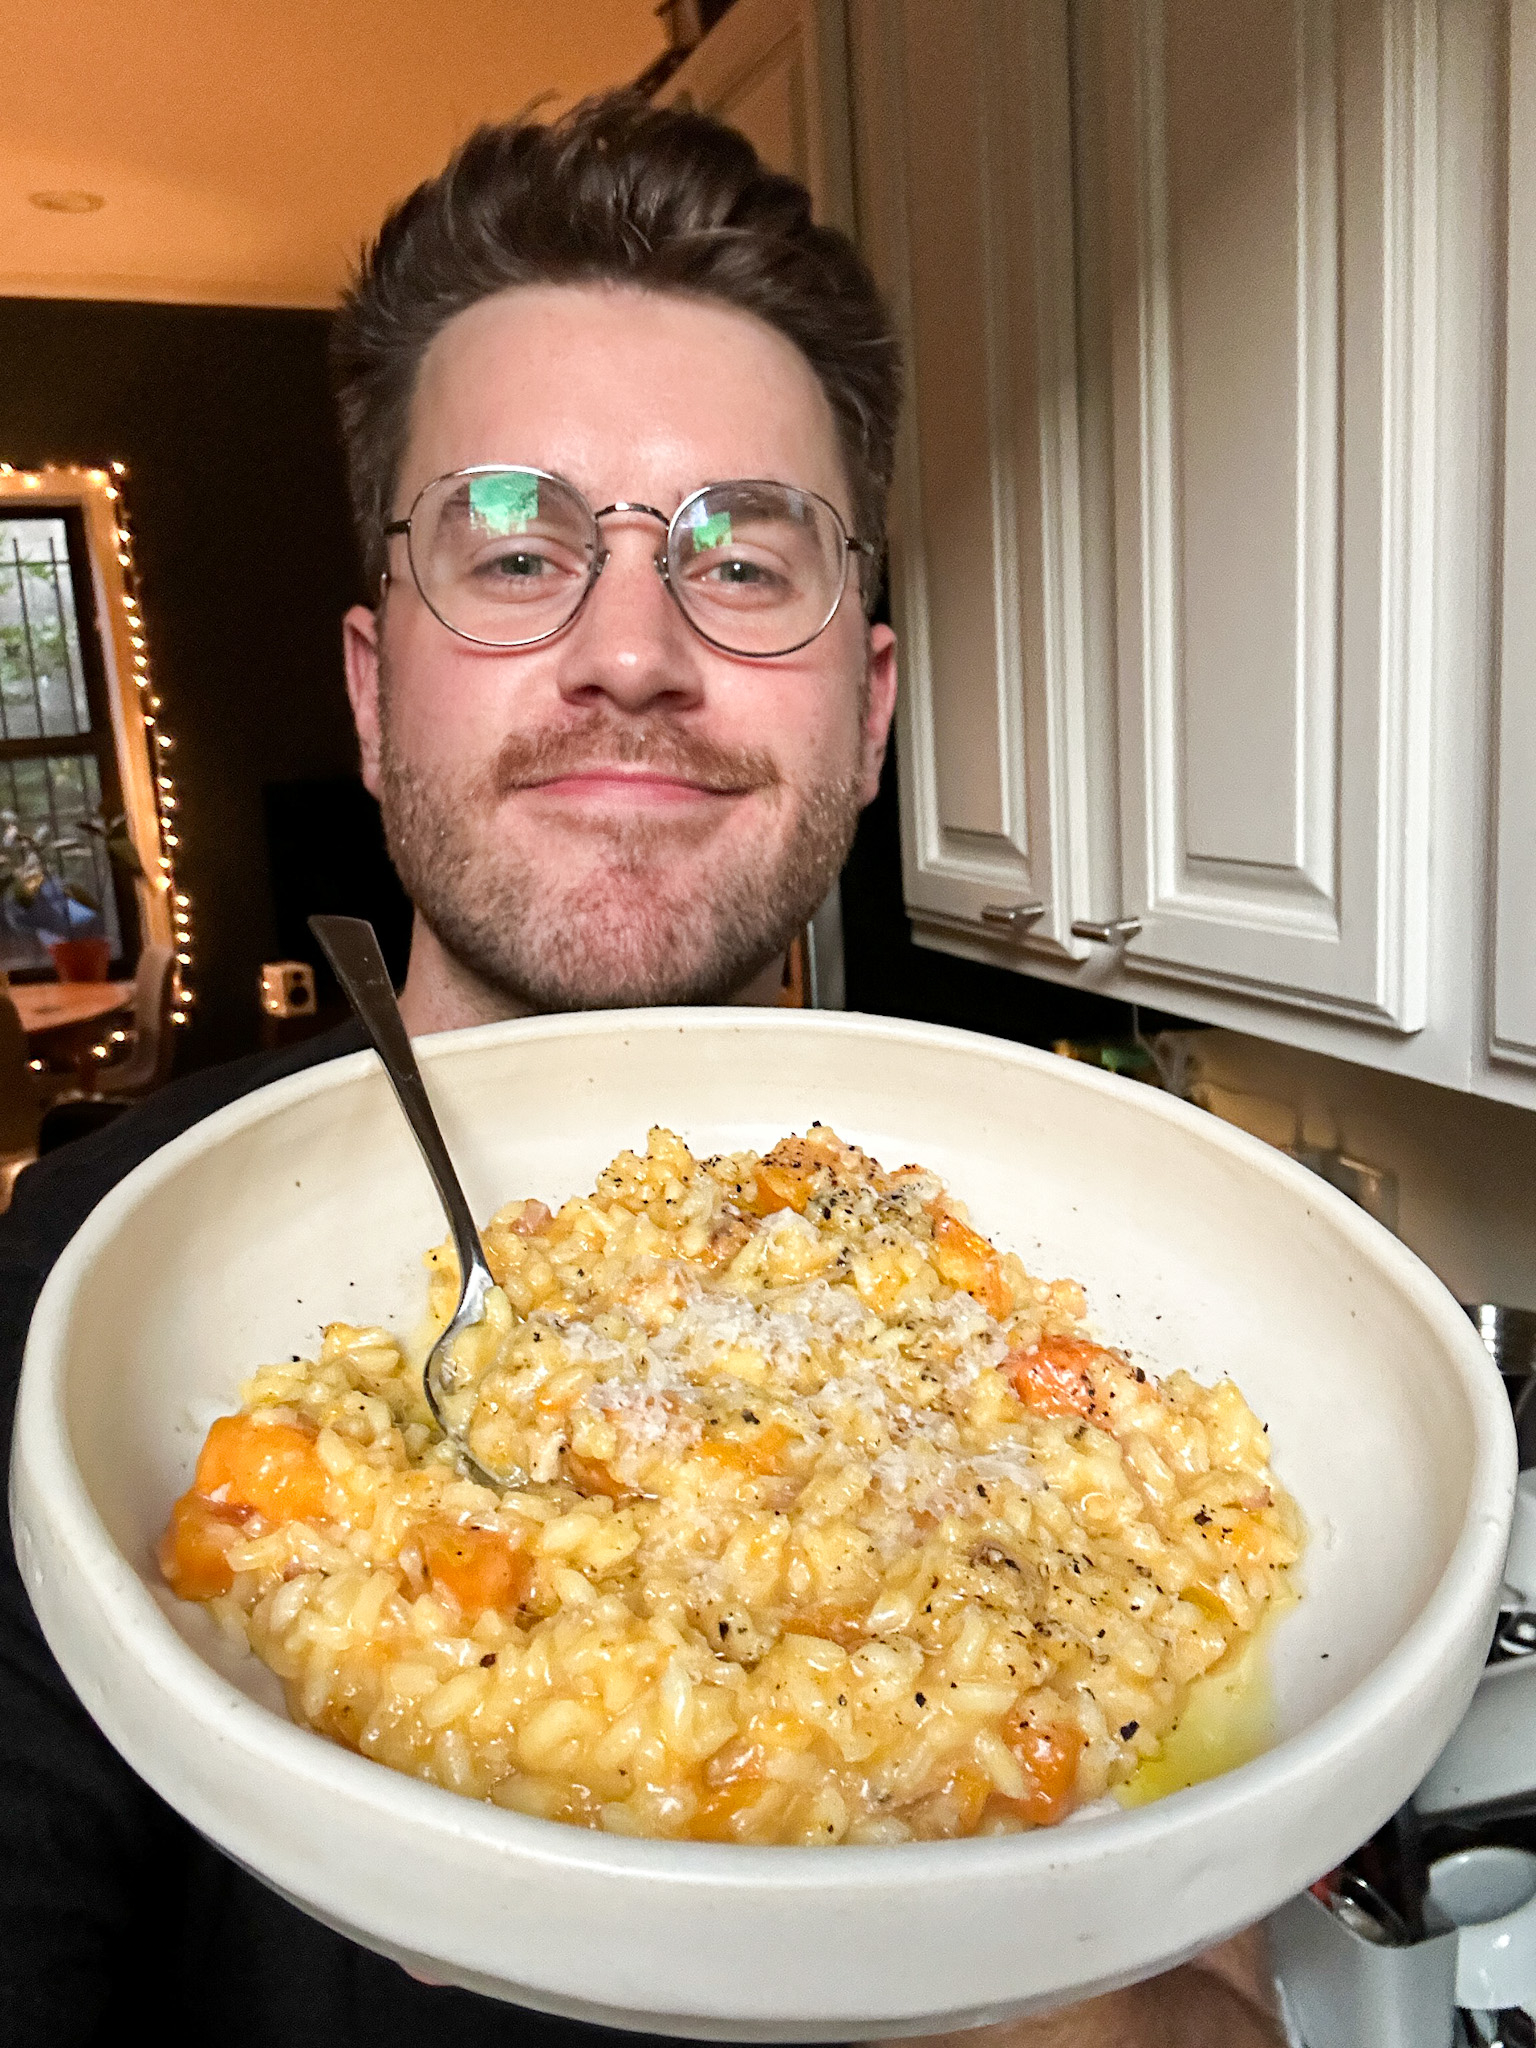 Selfie of the author holding up a bowl of the risotto in his kitchen